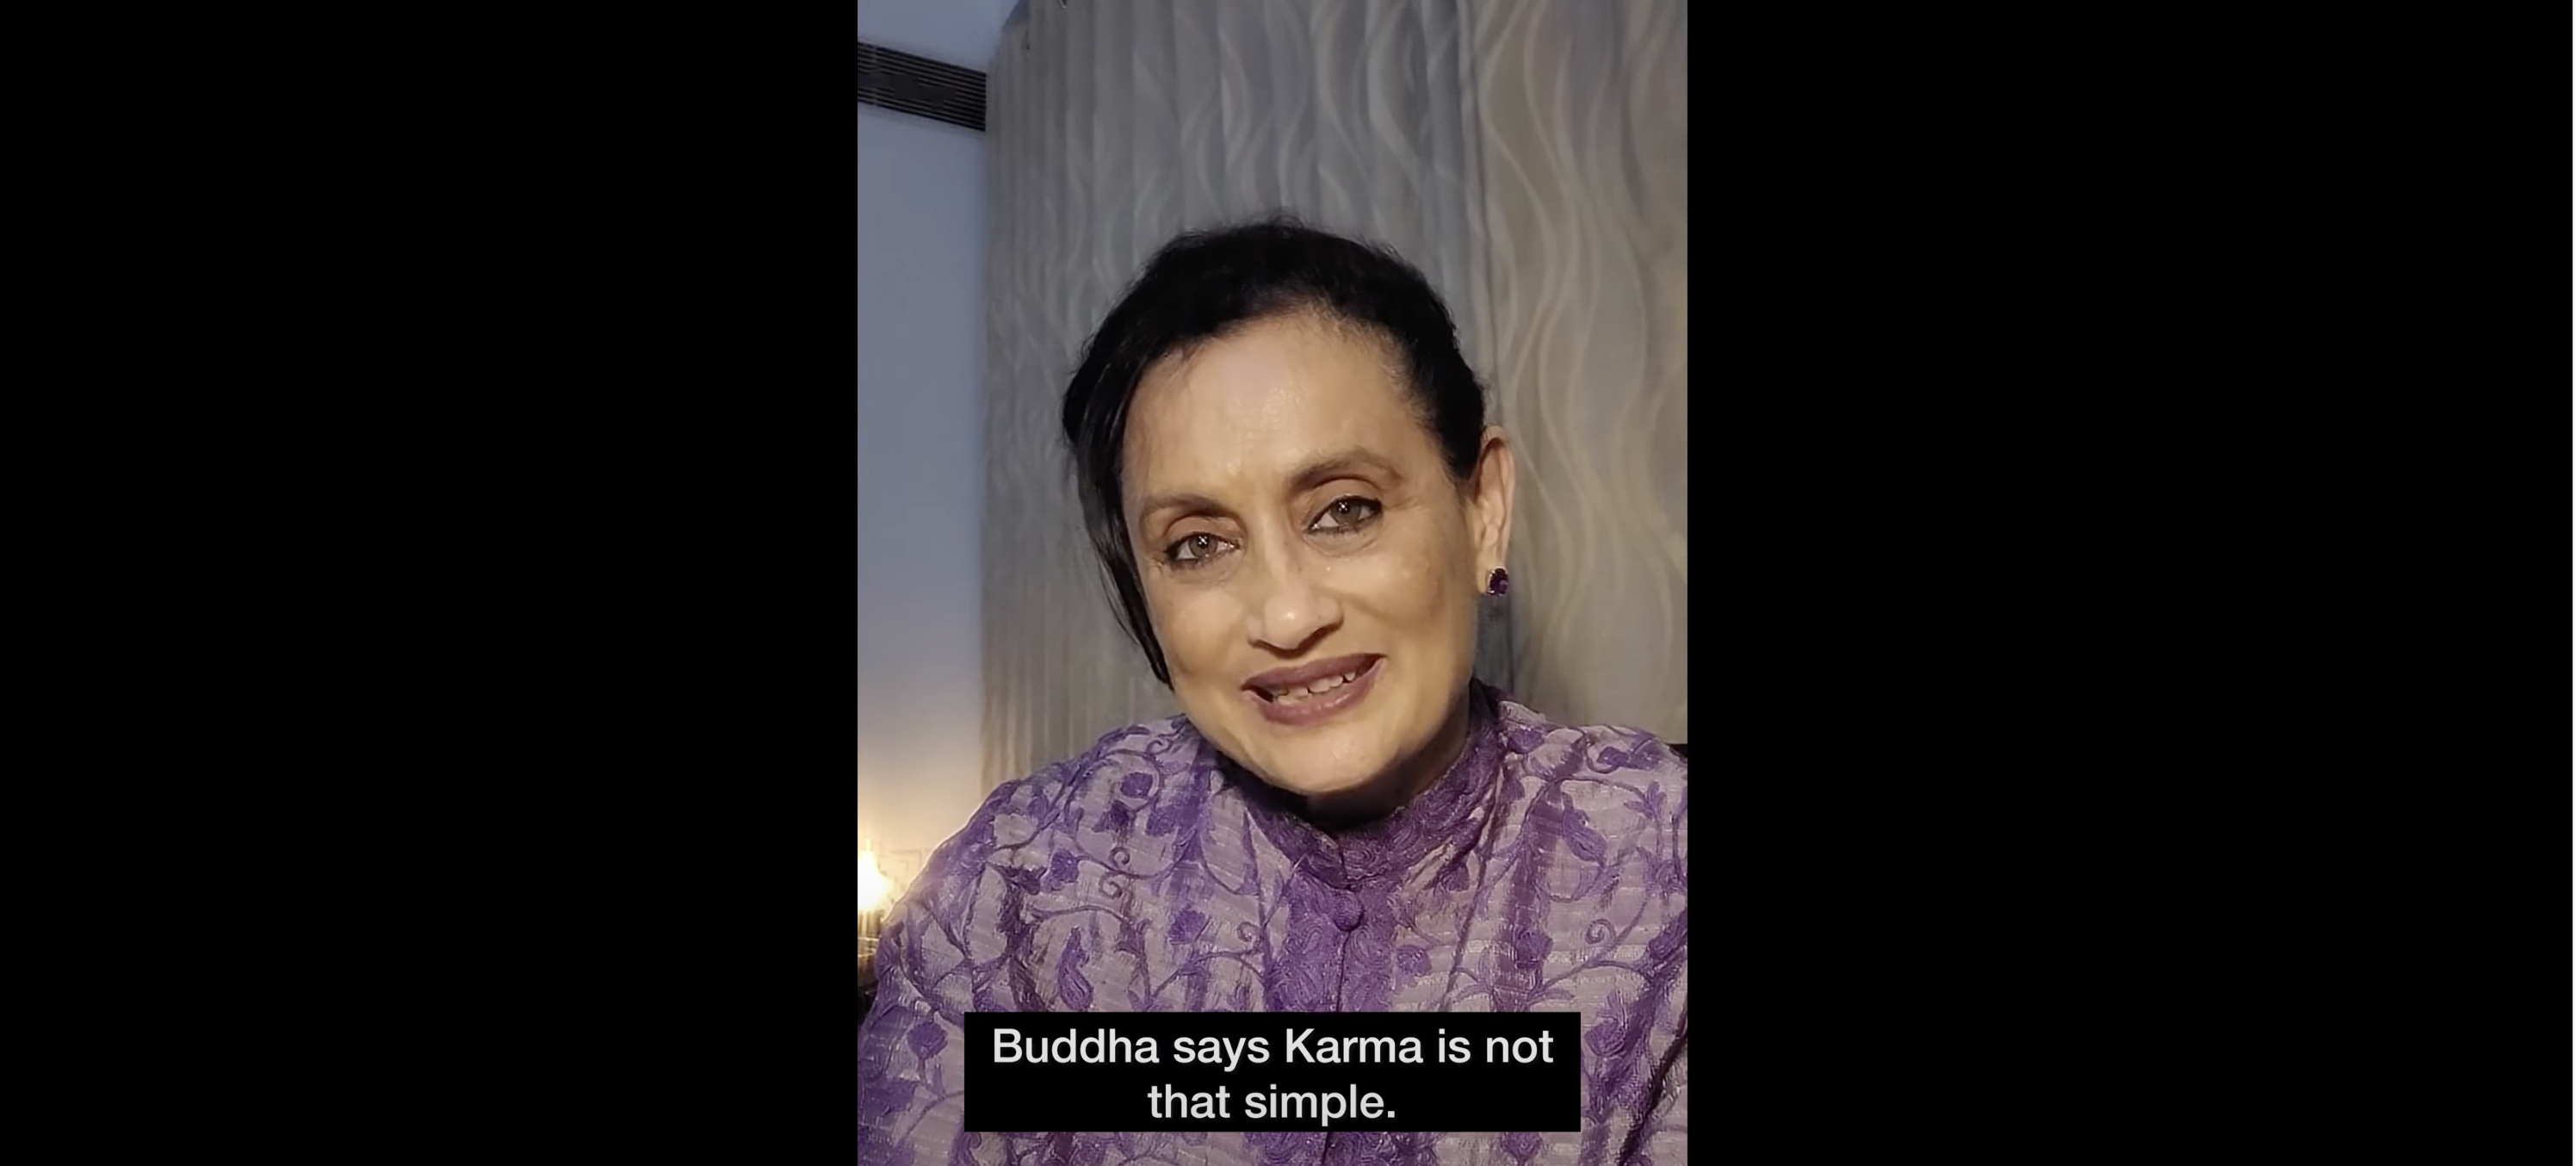 Buddha says Karma is not that simple